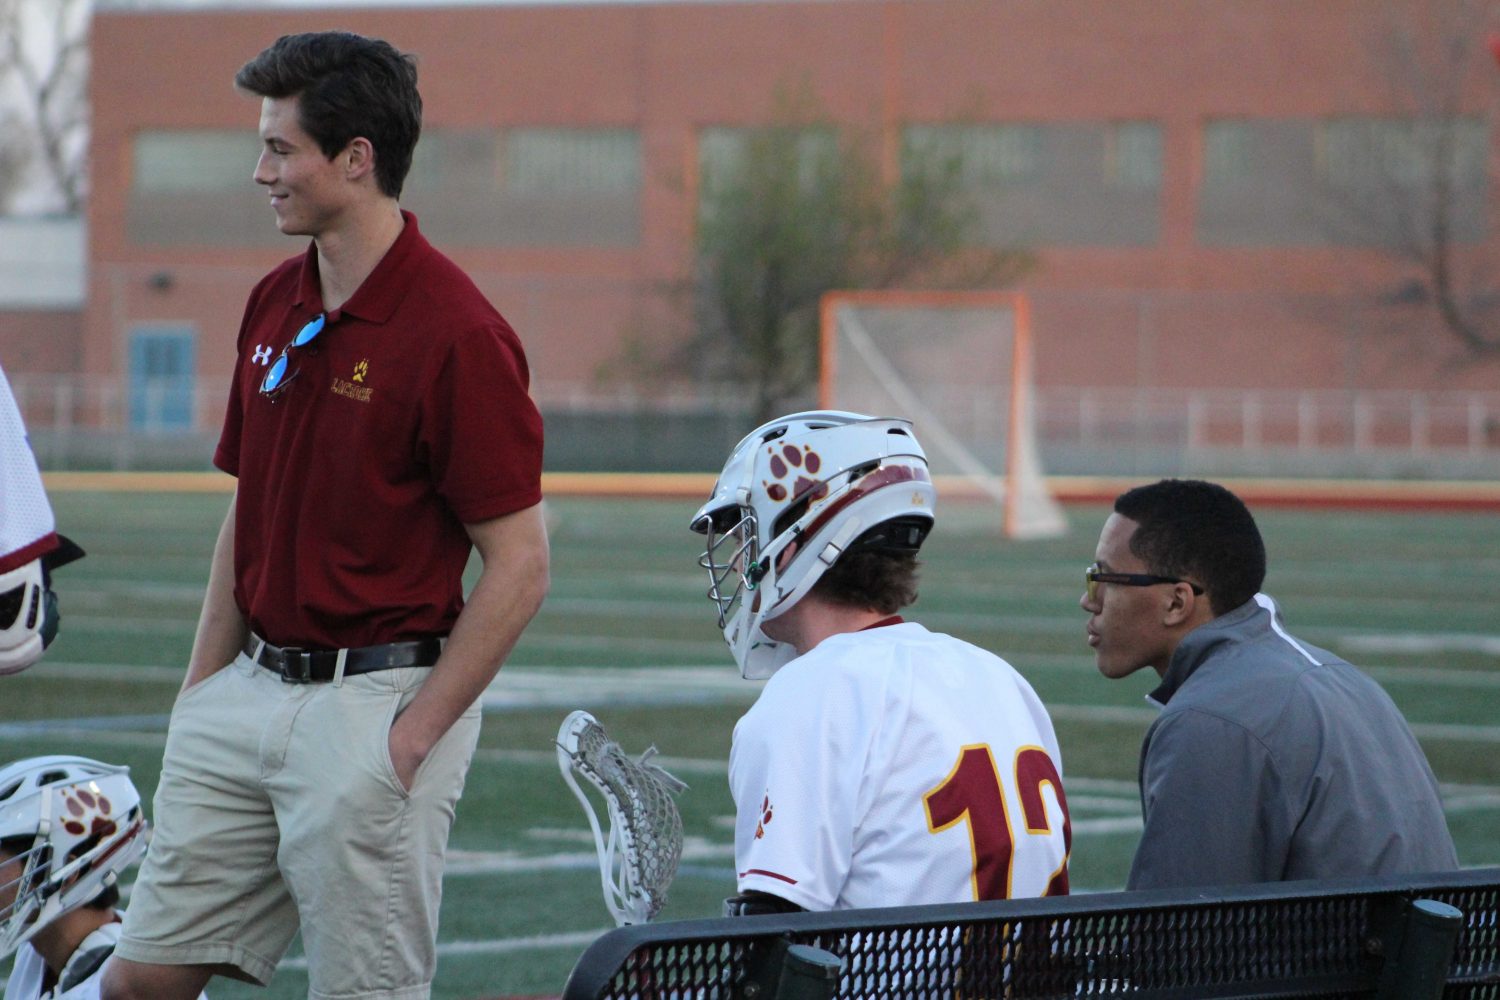 Zach West smiles on the sidelines as the Lobos take on Ralston Valley. Photo credit: Emily Brey   